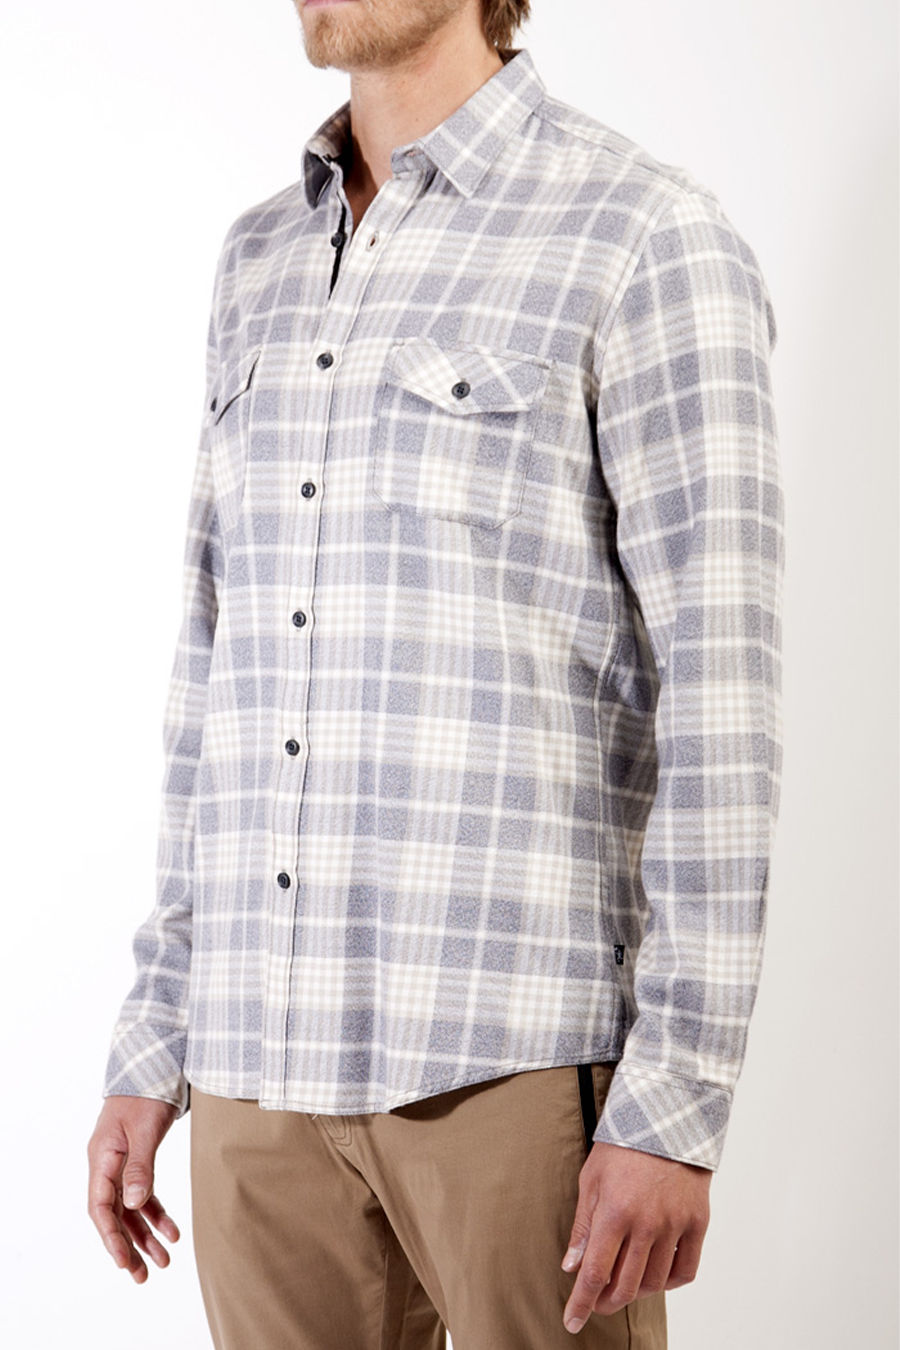 Lawless Plaid Shirt | Heather Gray - Main Image Number 2 of 2